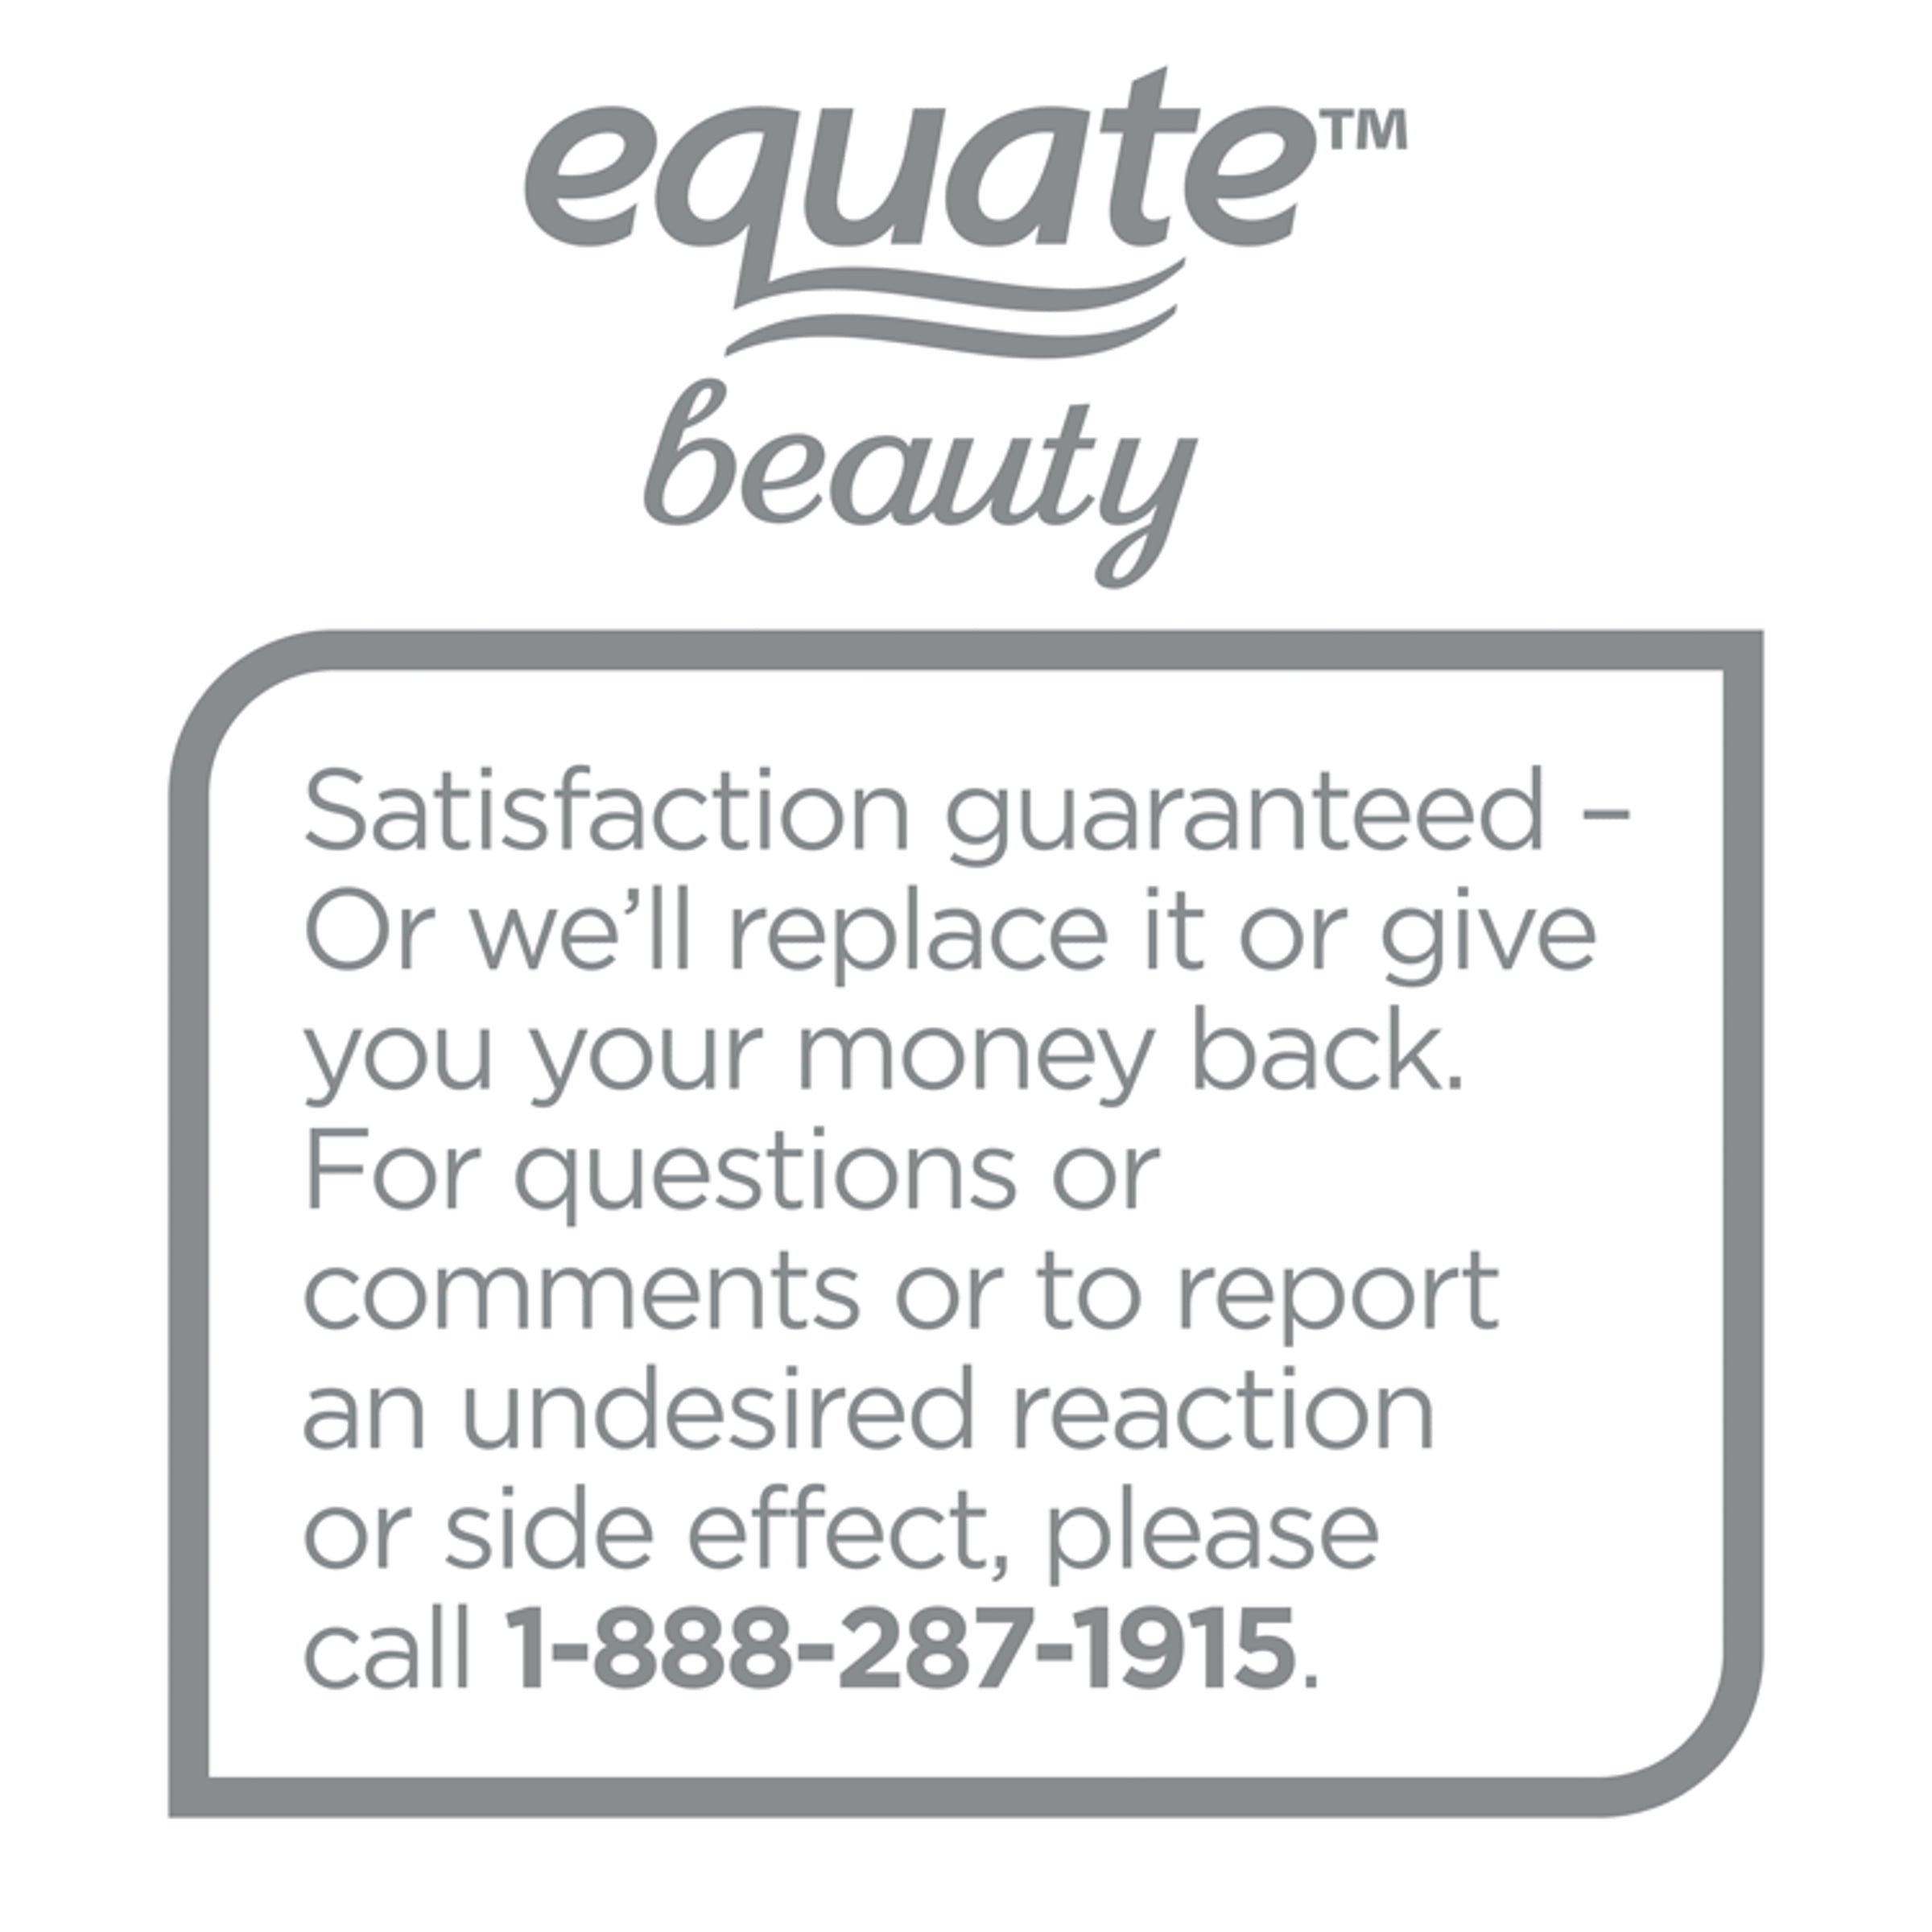 Equate Beauty Cotton Balls, Large Jumbo Size, 400 Count Package, 1